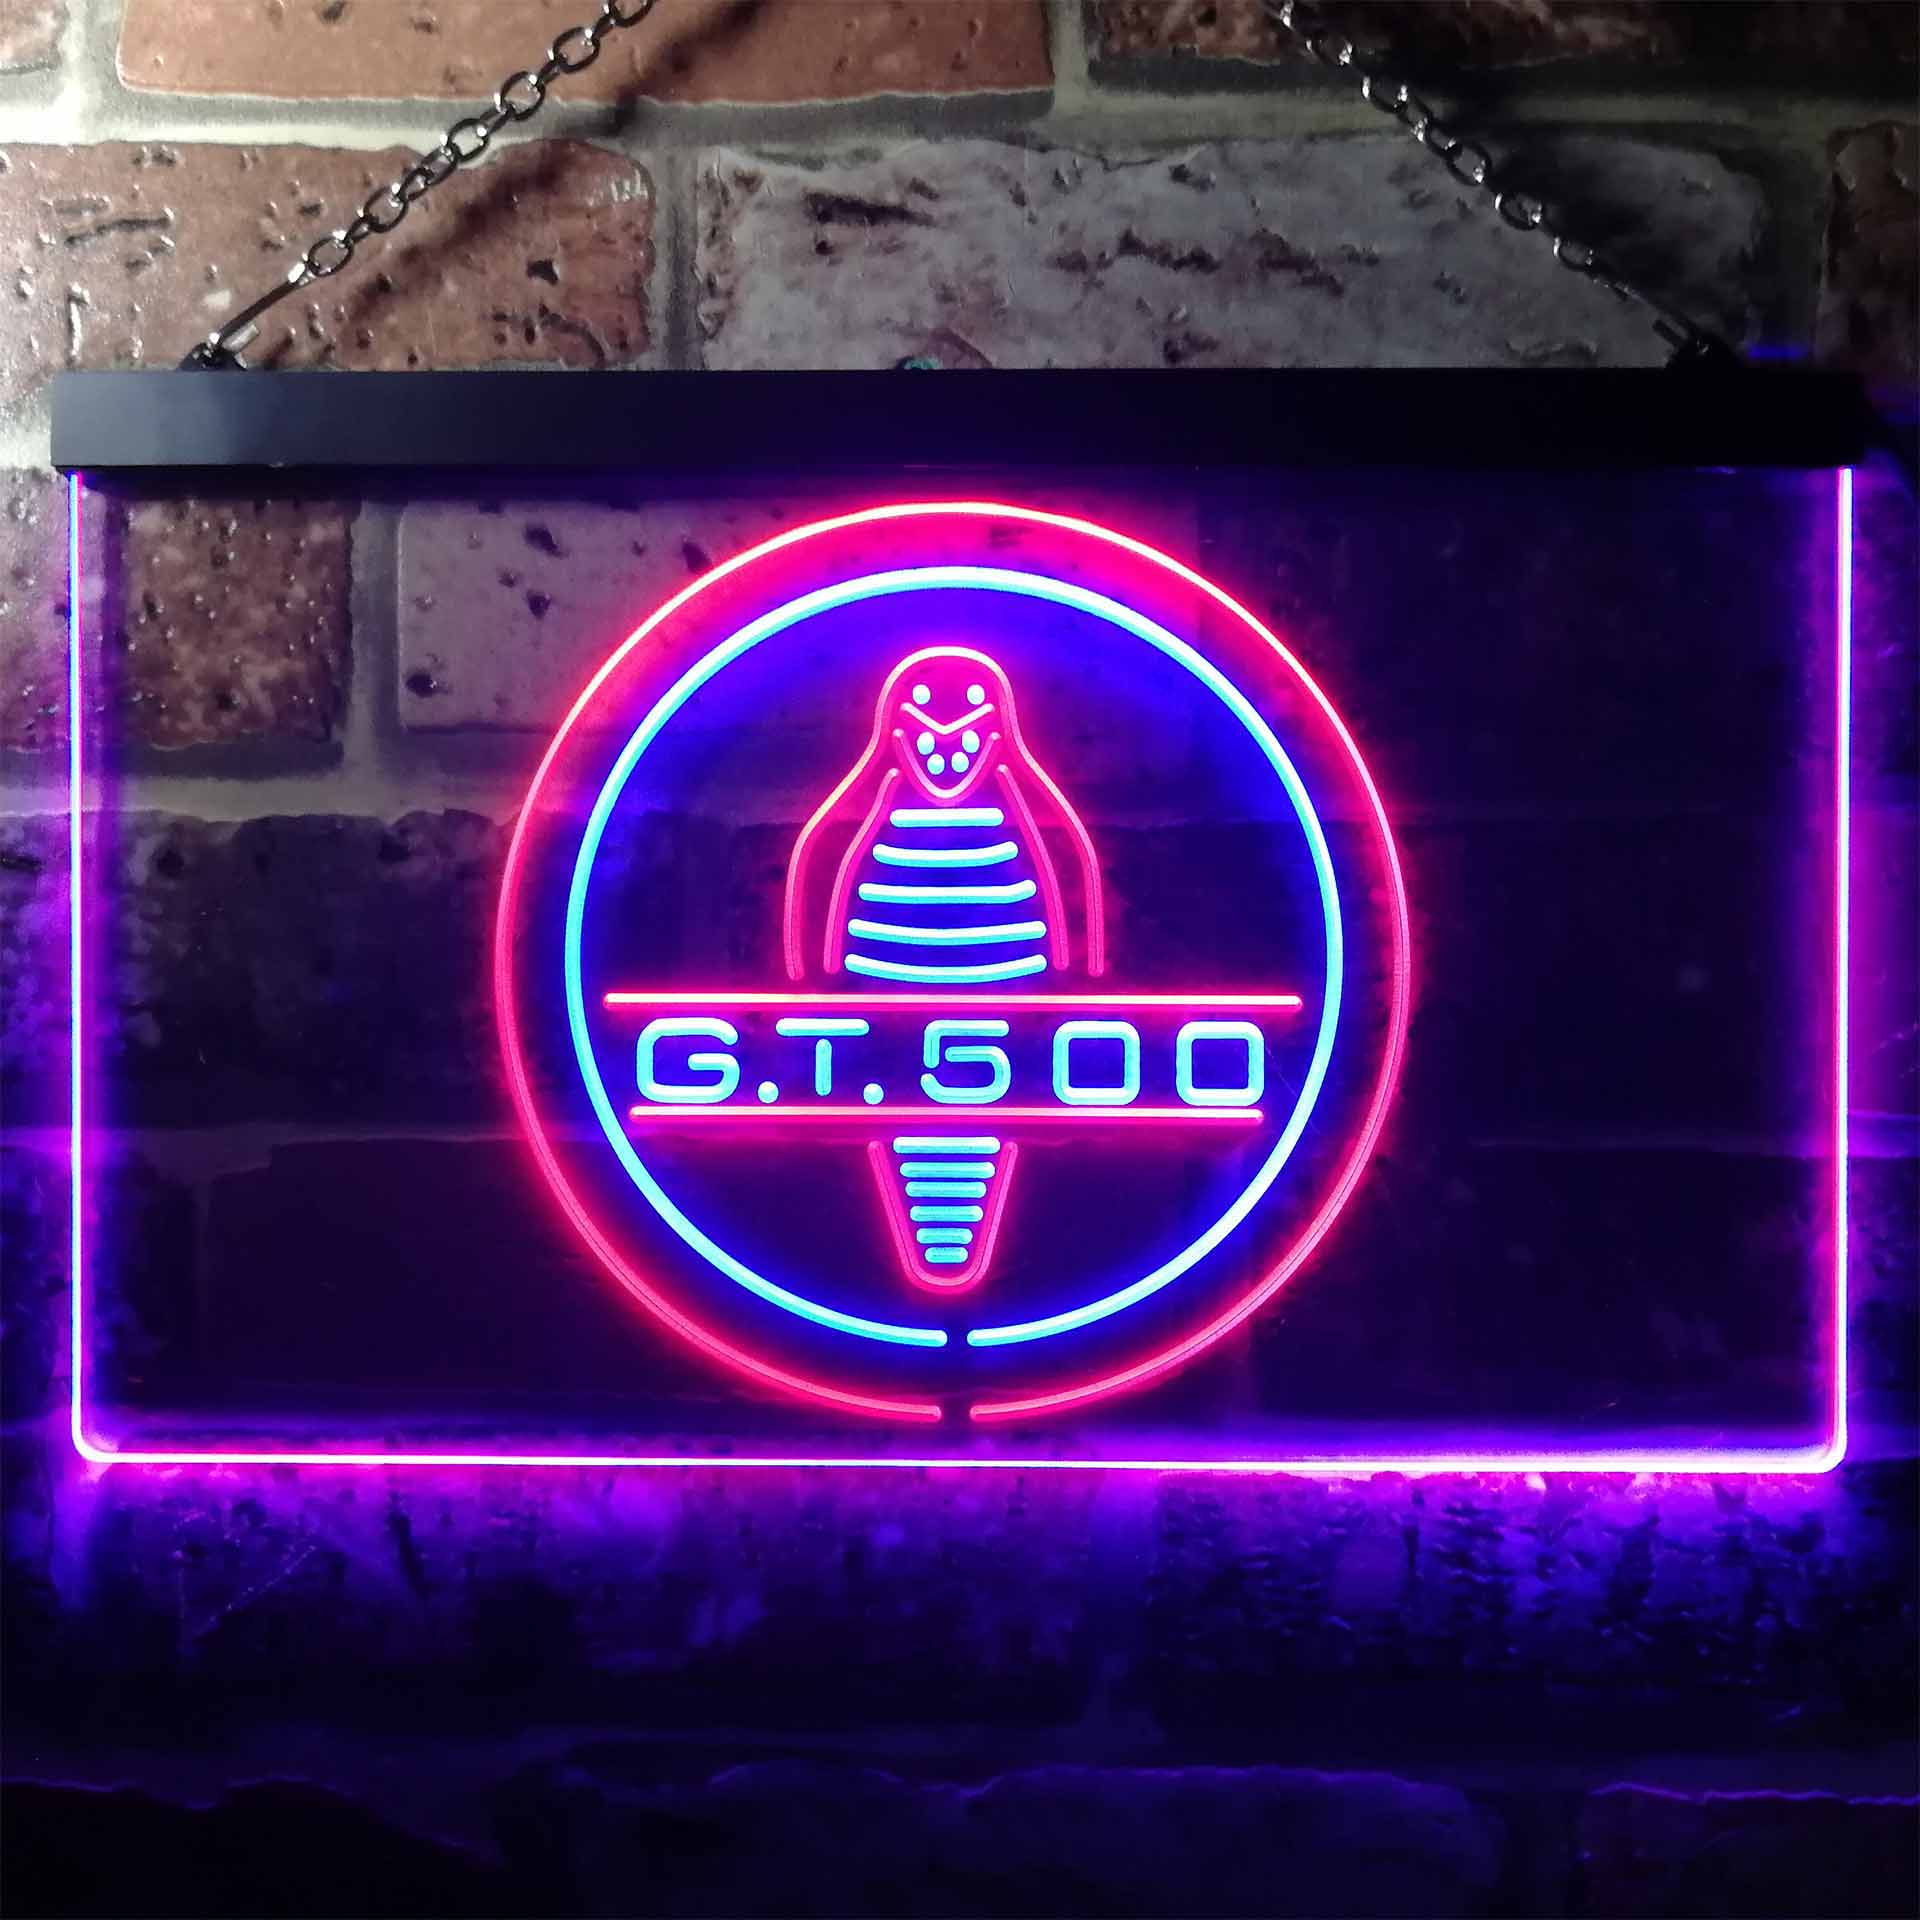 Ford Mustang Shelby Cobra GT 500 LED Neon Sign